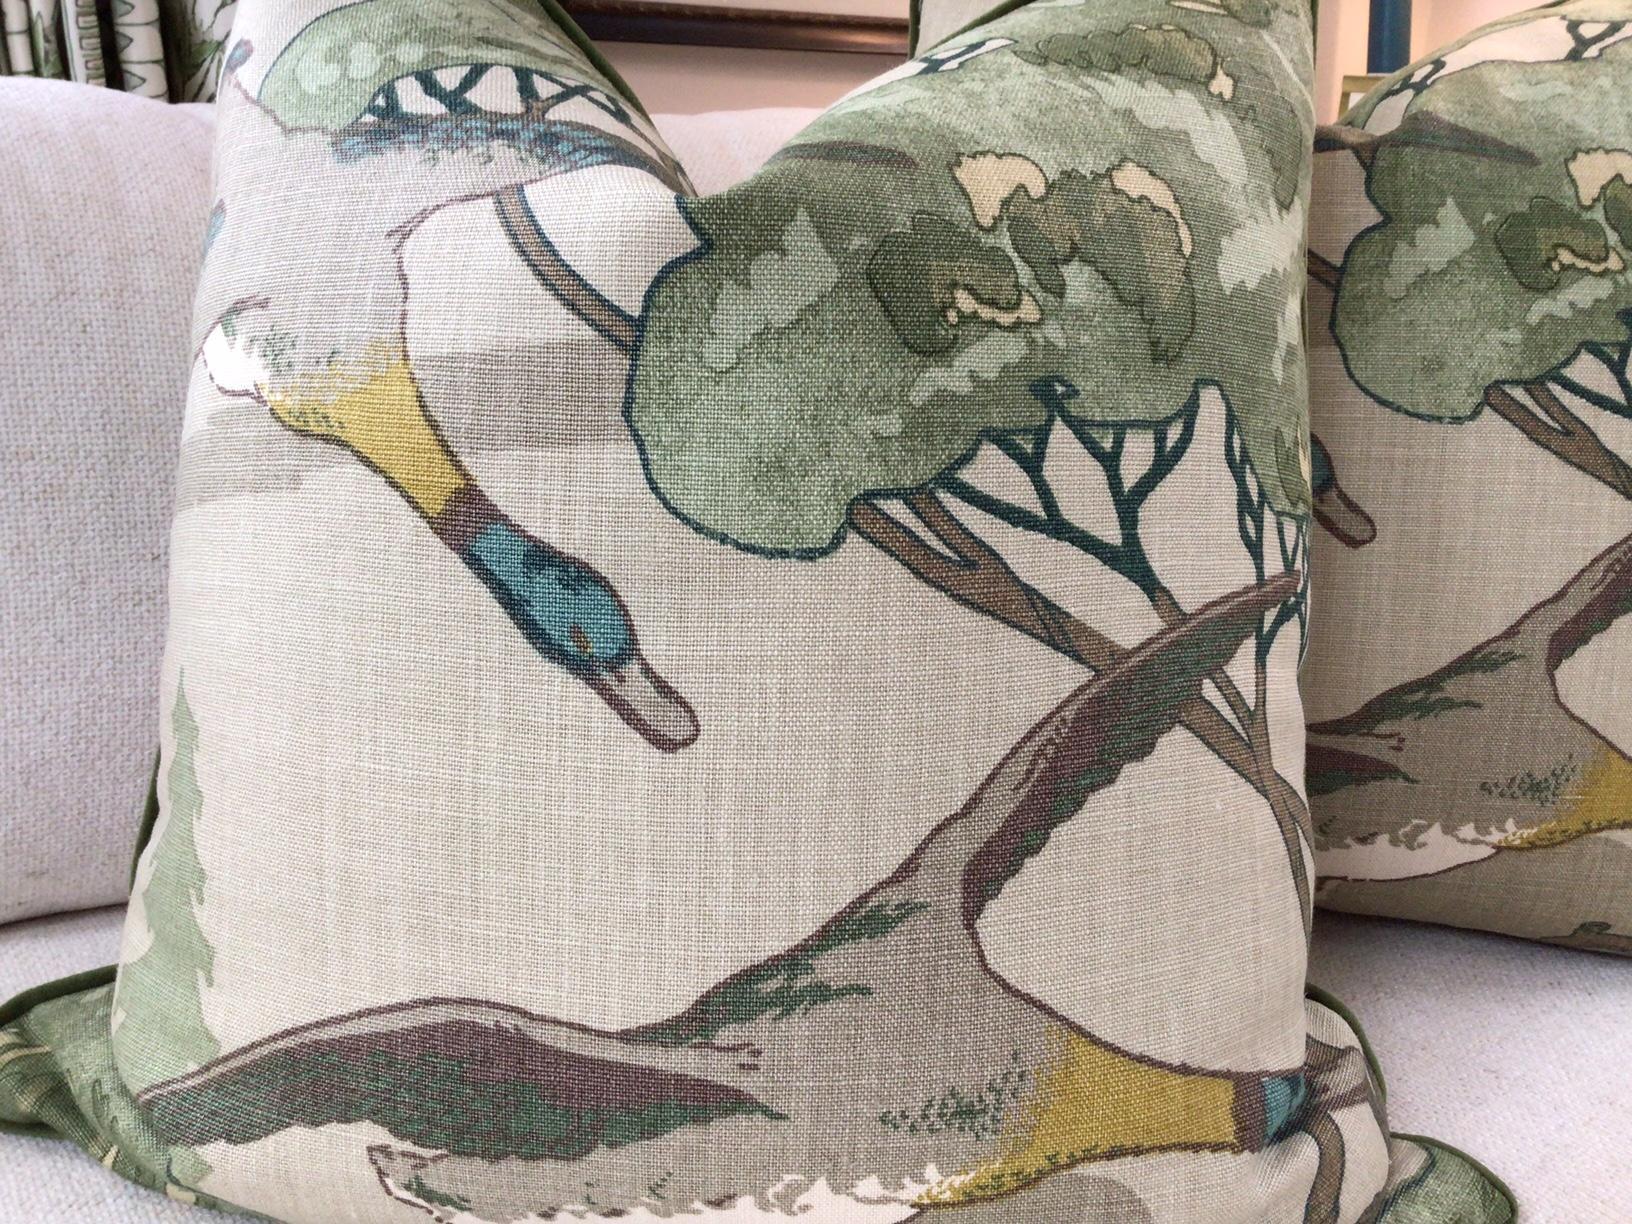 BEAUTIFUL and reminiscent of an English country Manor home, Lee Jofa's “Flying Ducks” is a lovely pattern from Mulberry and features ducks in flight in rich colors of Rich tones of green, teal, tan, and yellow. This exquisite scene is on a tan linen